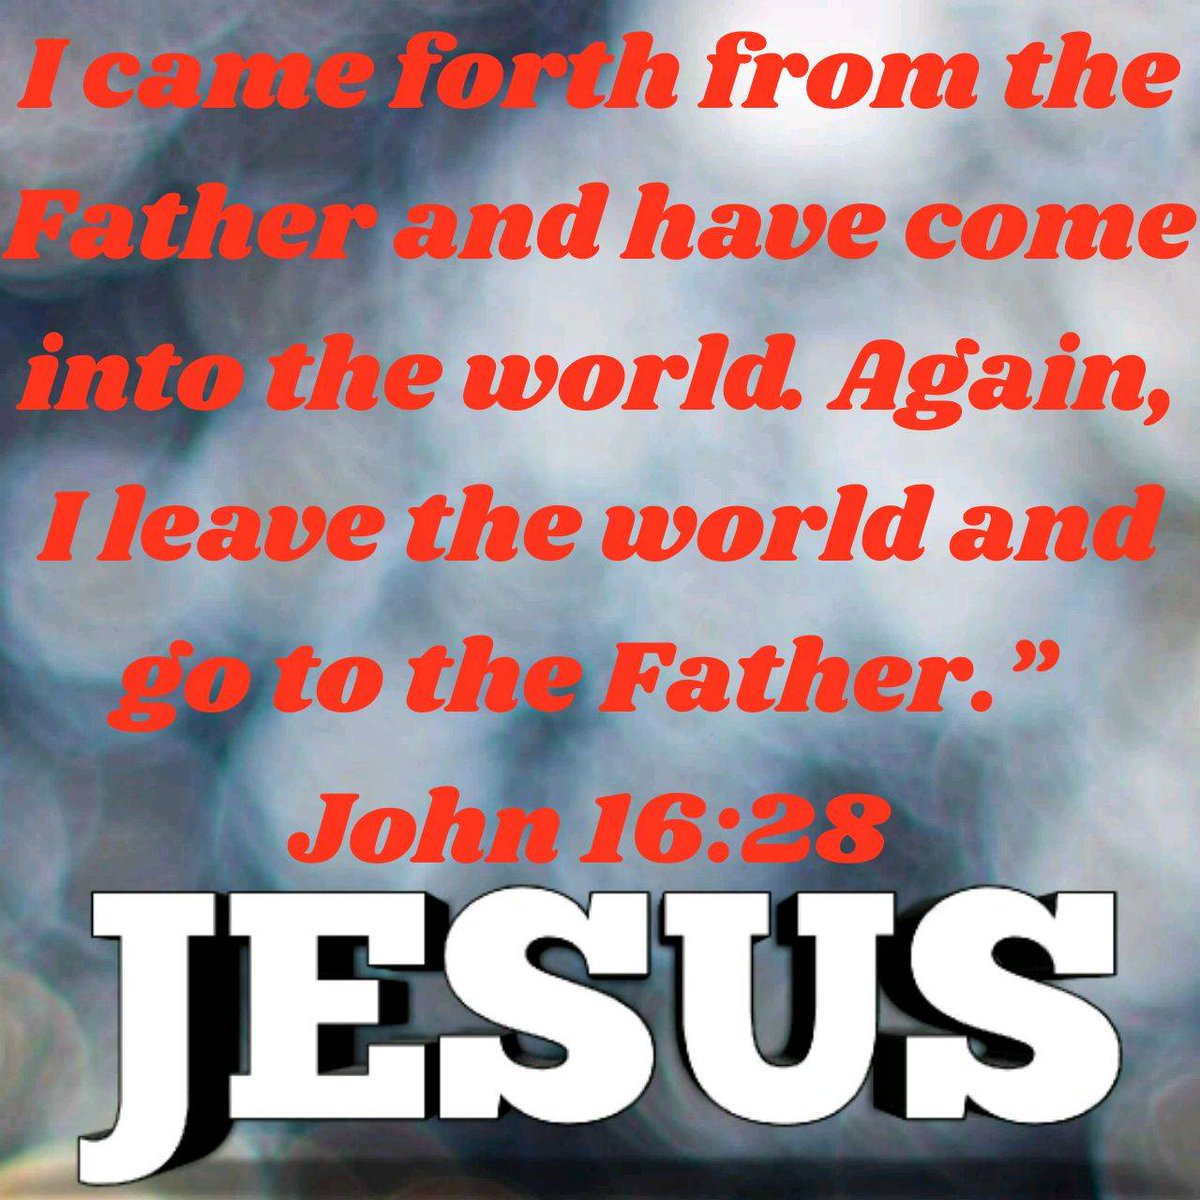 John 16:28 NKJV [28] I came forth from the Father and have come into the world. Again, I leave the world and go to the Father.” bible.com/bible/114/jhn.…